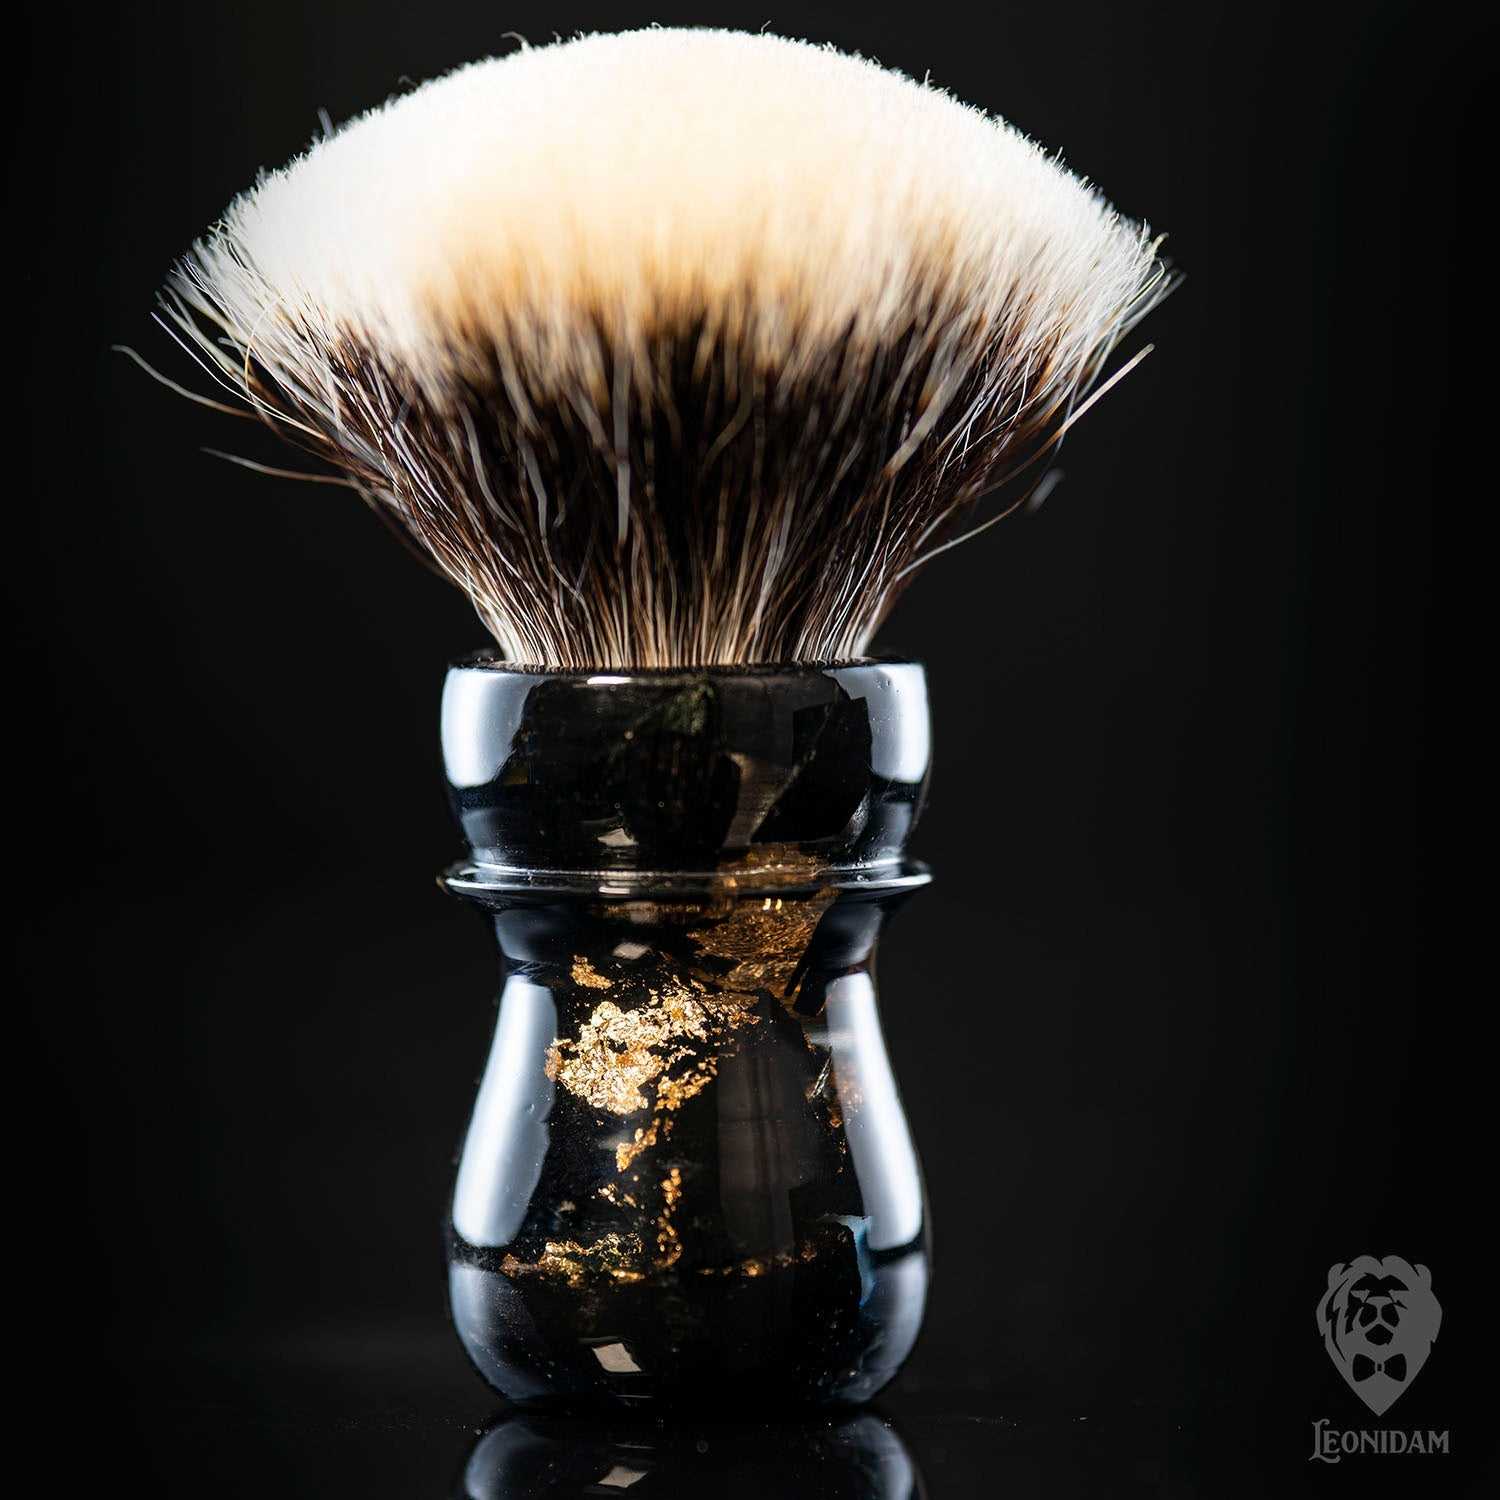 Handmade shaving brush “Loki” in stabilized black wood and clear hand poured resin.  